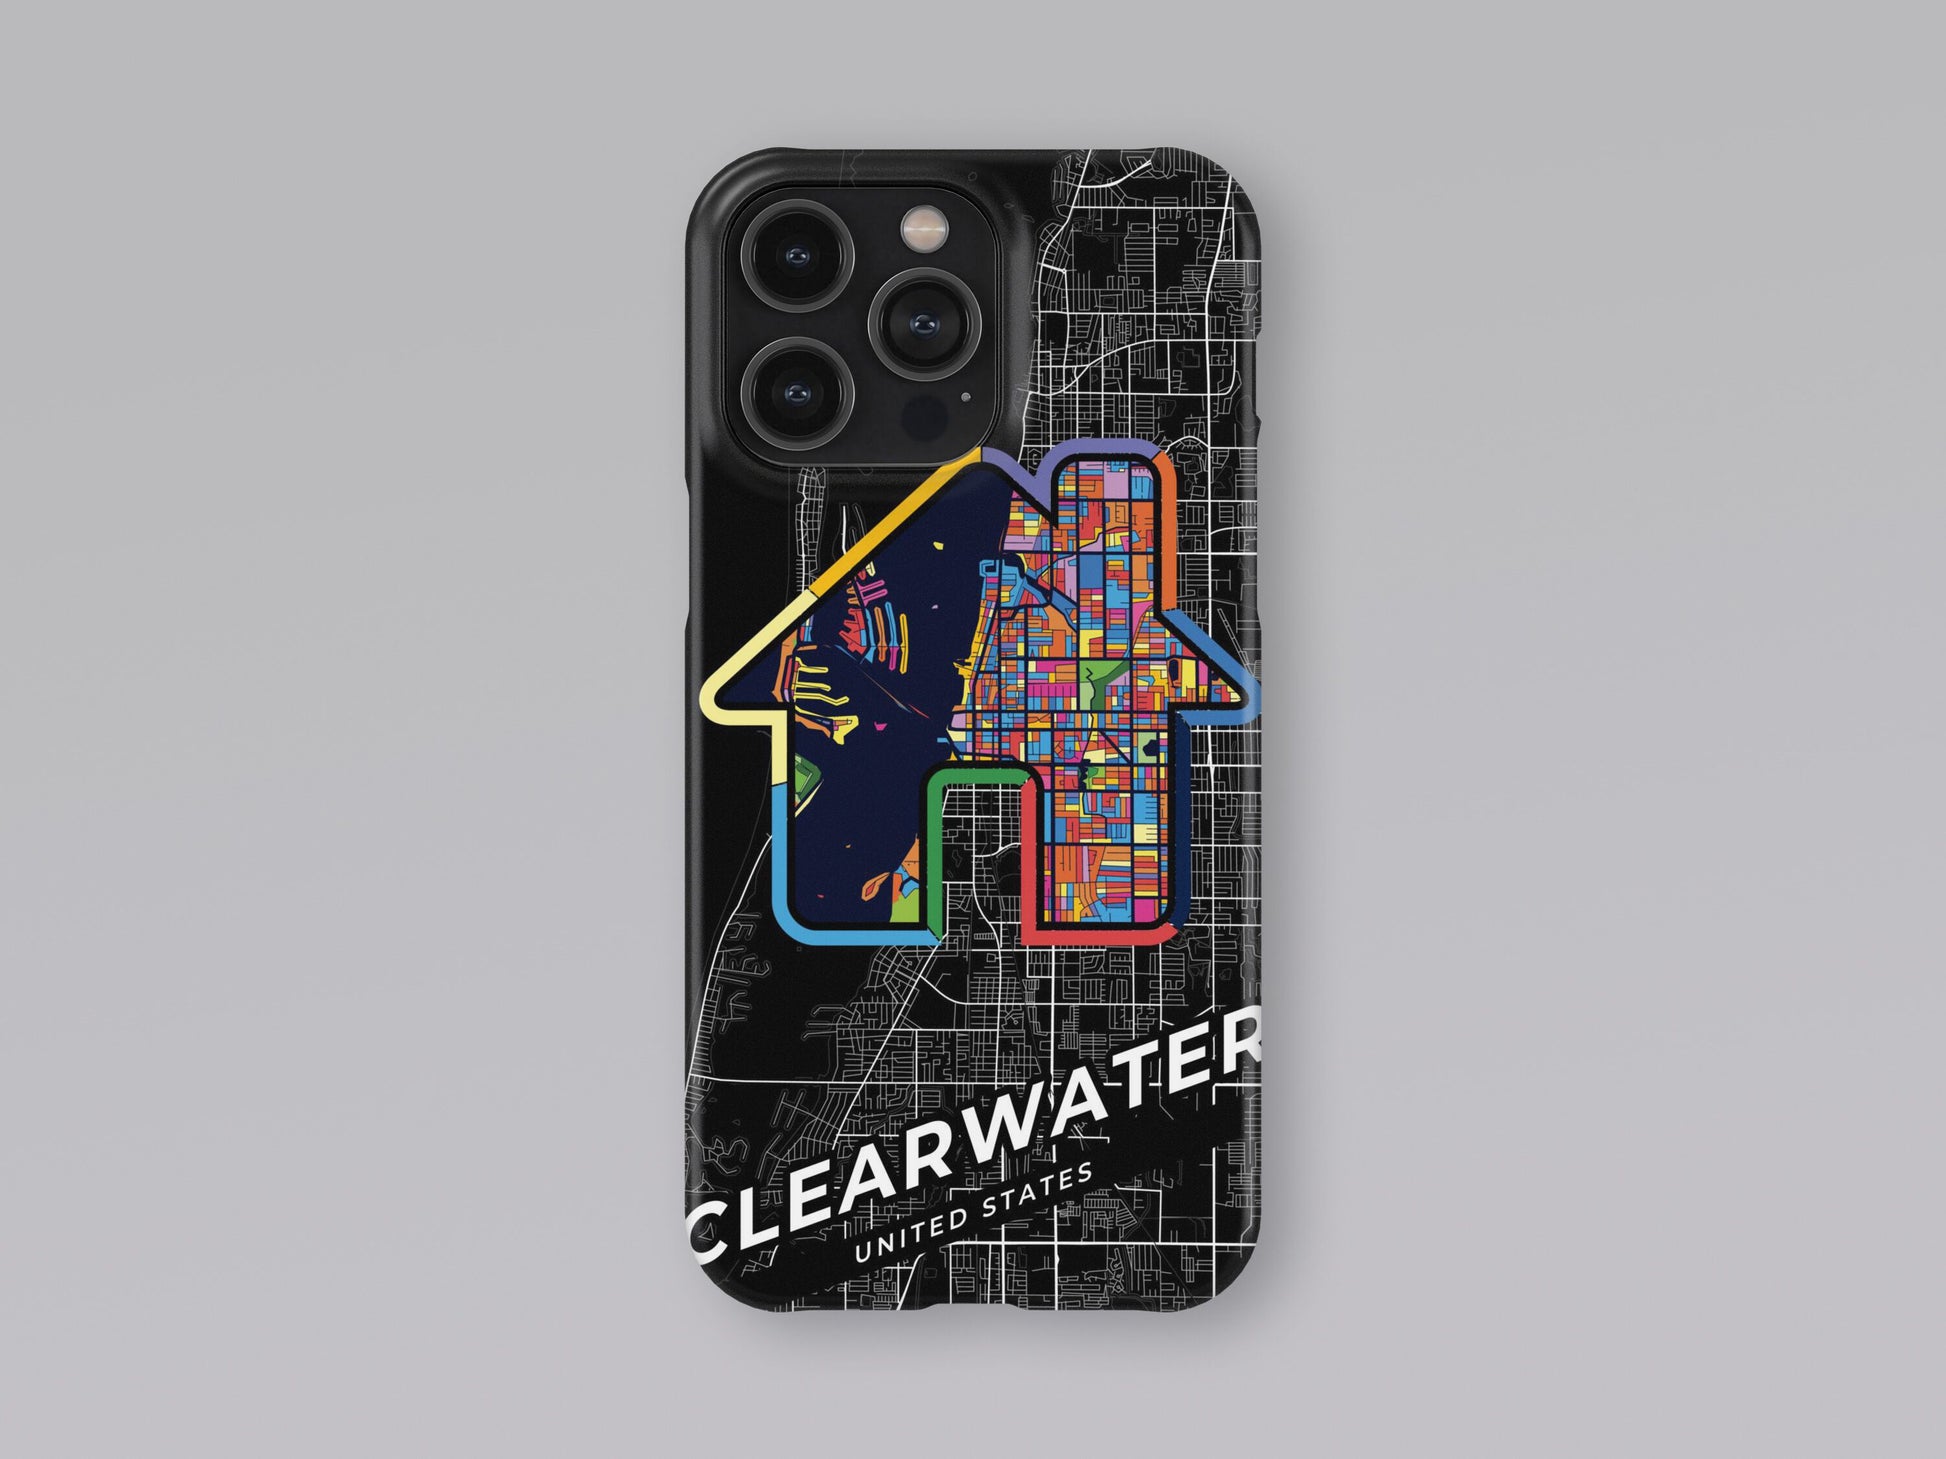 Clearwater Florida slim phone case with colorful icon. Birthday, wedding or housewarming gift. Couple match cases. 3